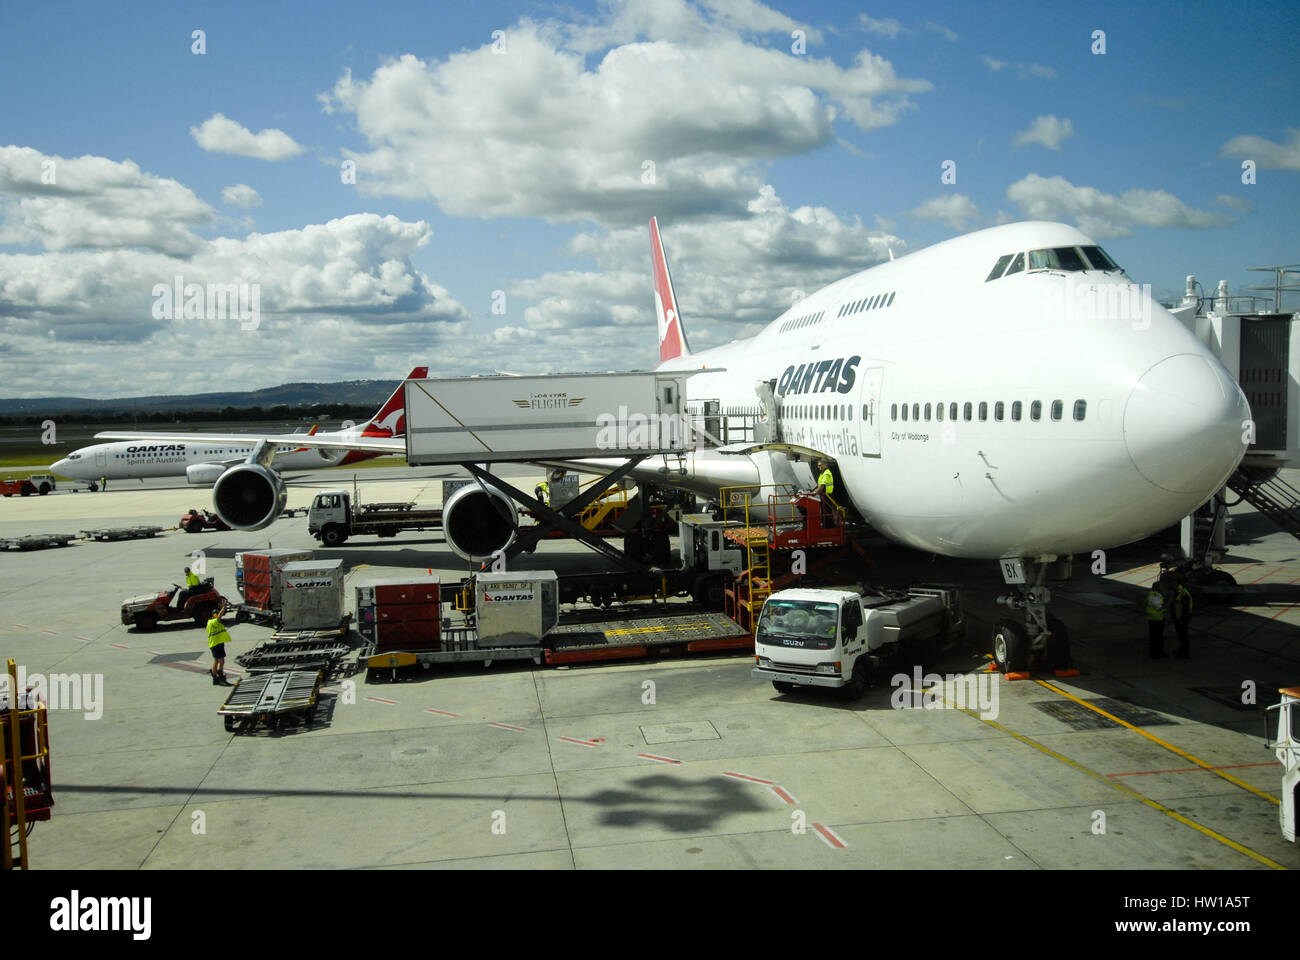 Boing 747 of the Qantas Airline , Boing 747 der Qantas Airline Stock Photo